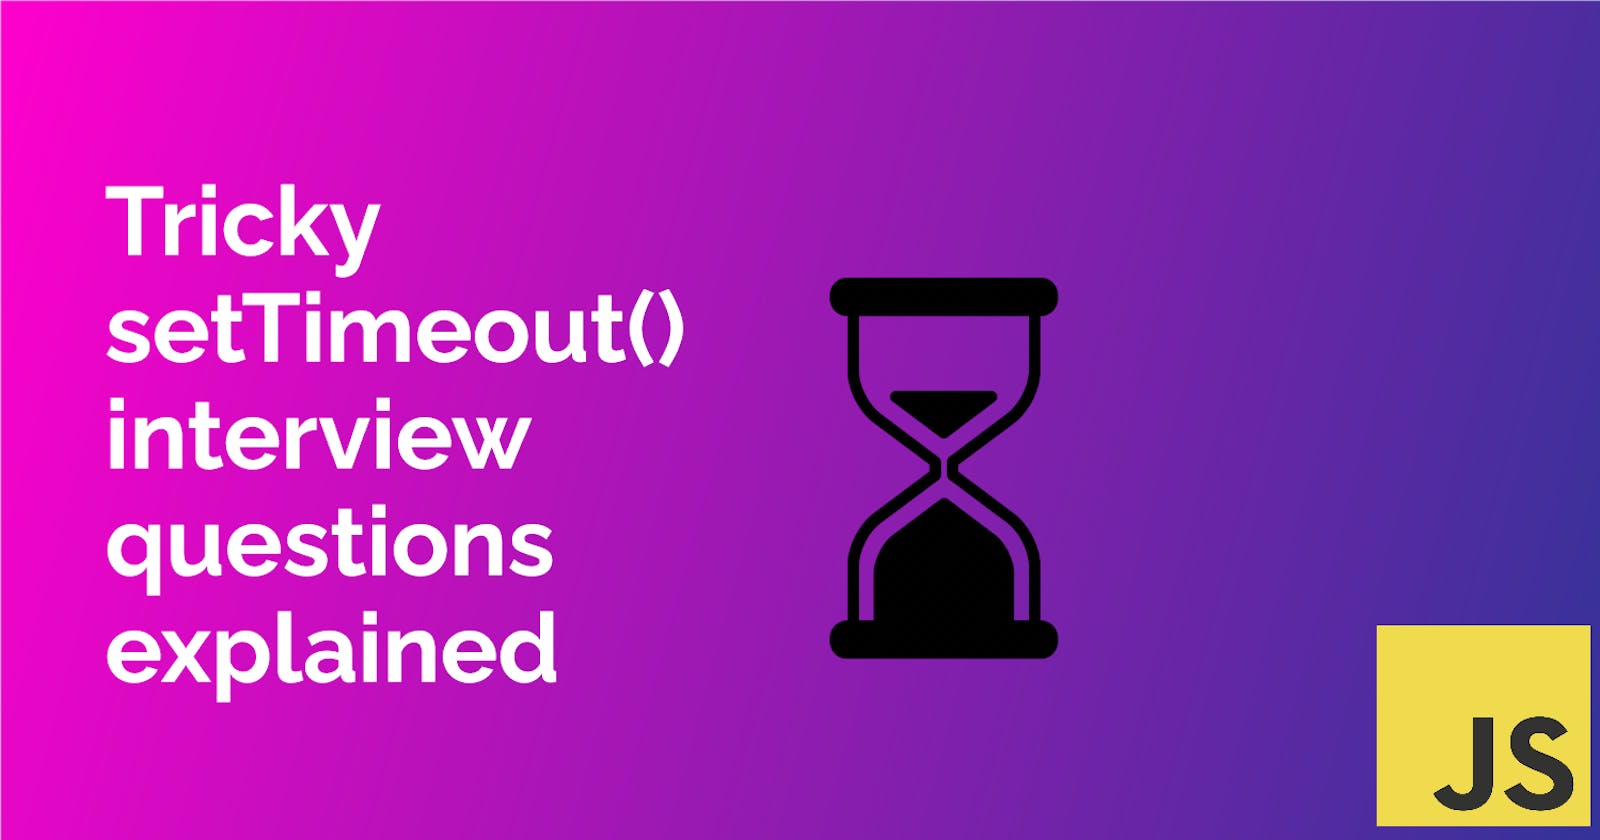 Tricky setTimeout() interview questions explained